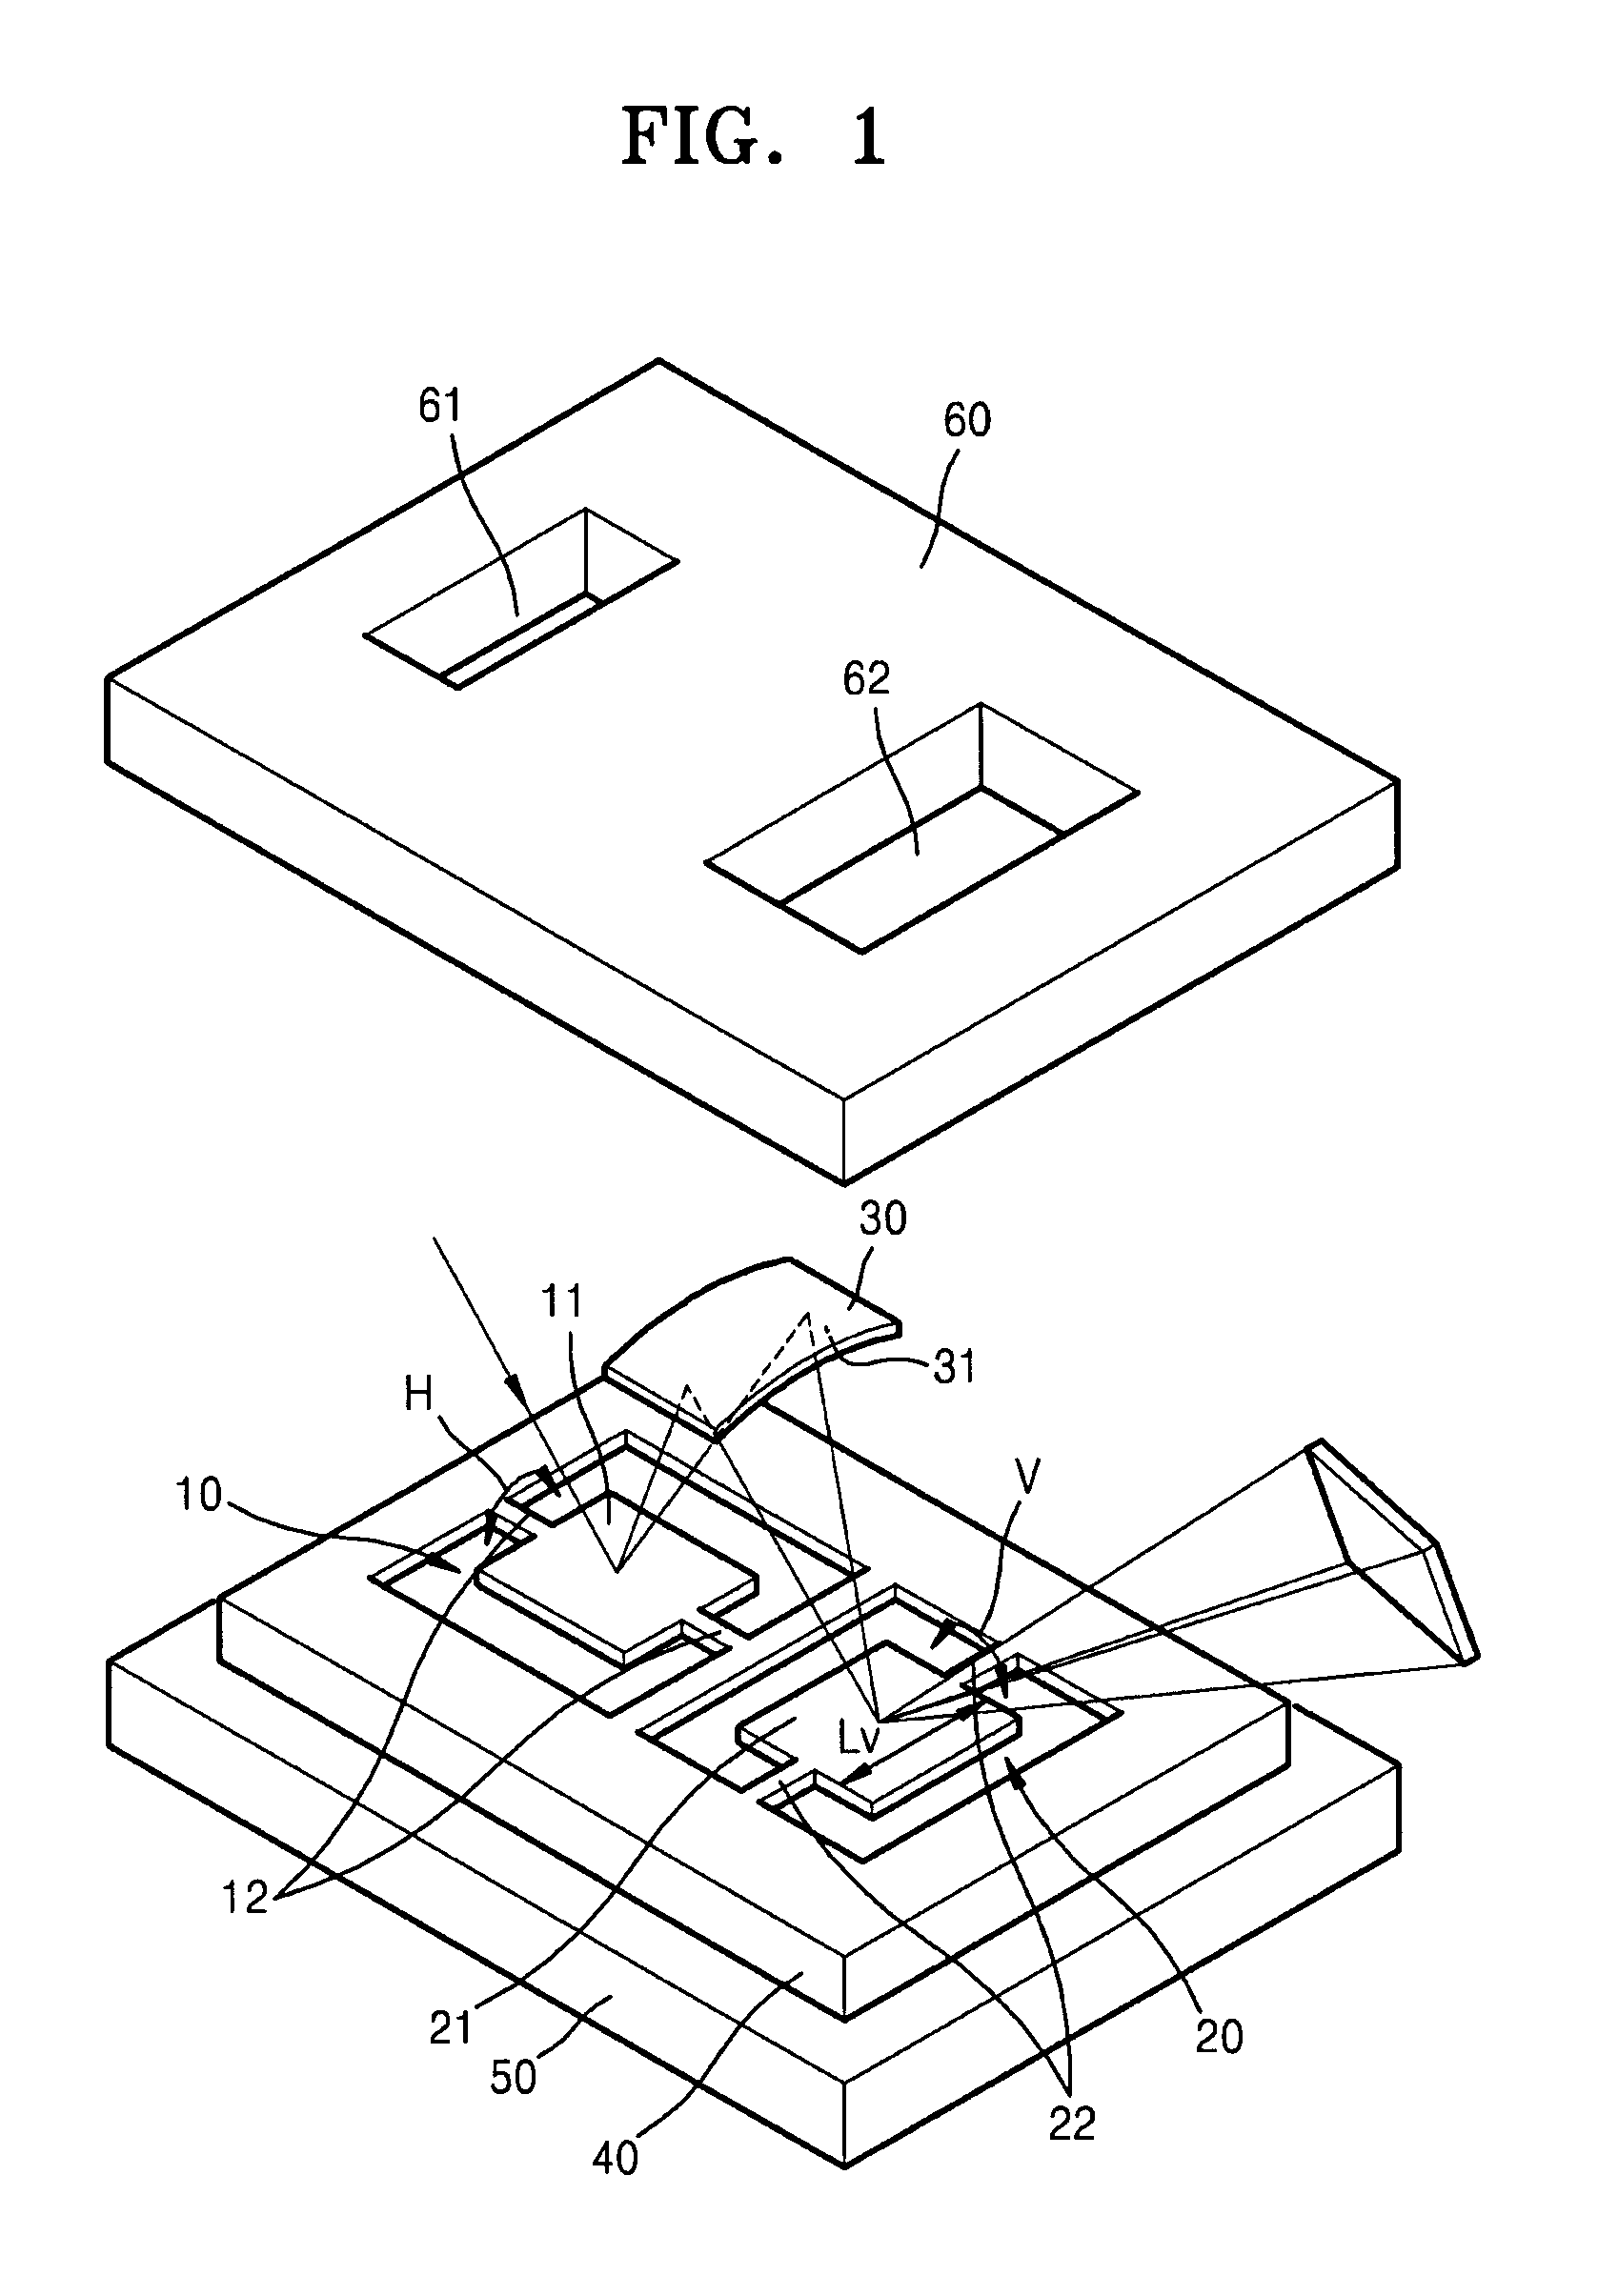 Two-dimensional micro optical scanner